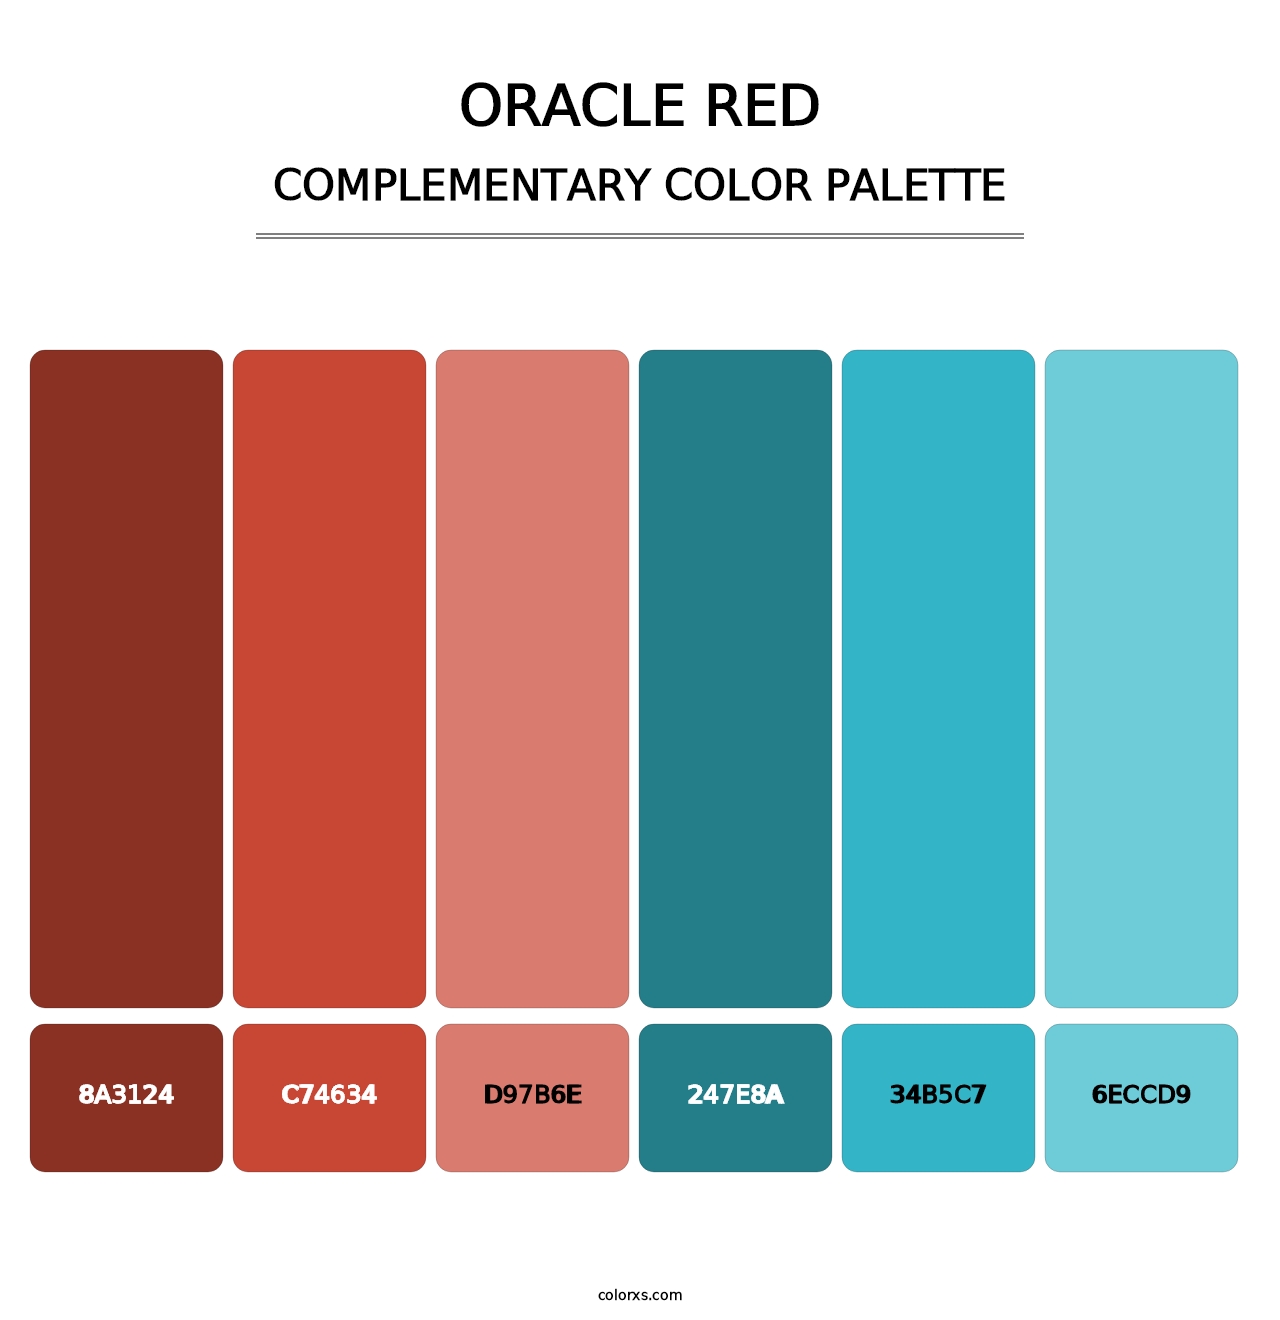 Oracle Red - Complementary Color Palette